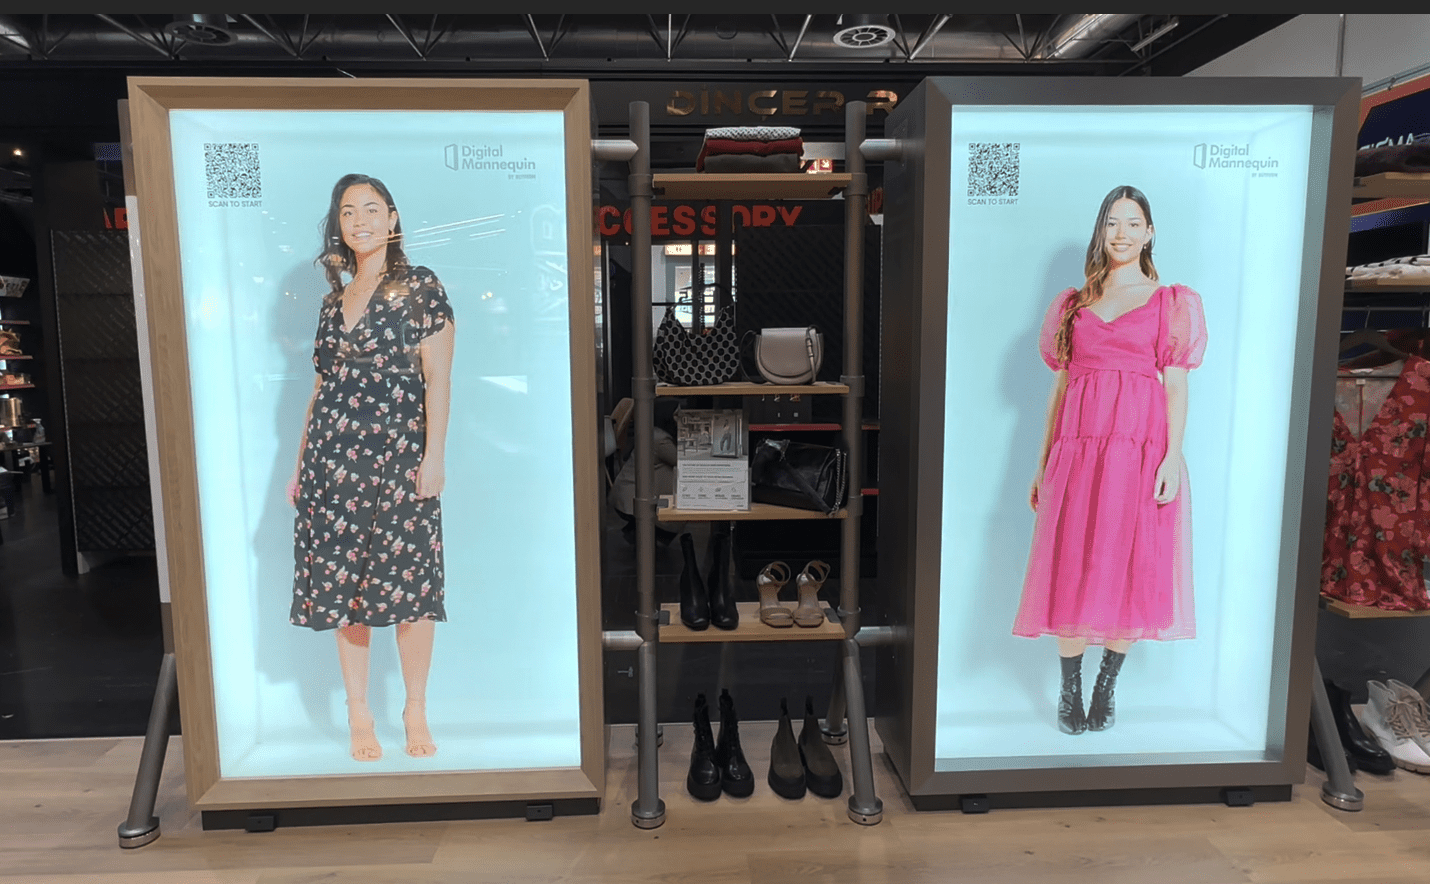 Digital Mannequin launched for fashion brands and retailers